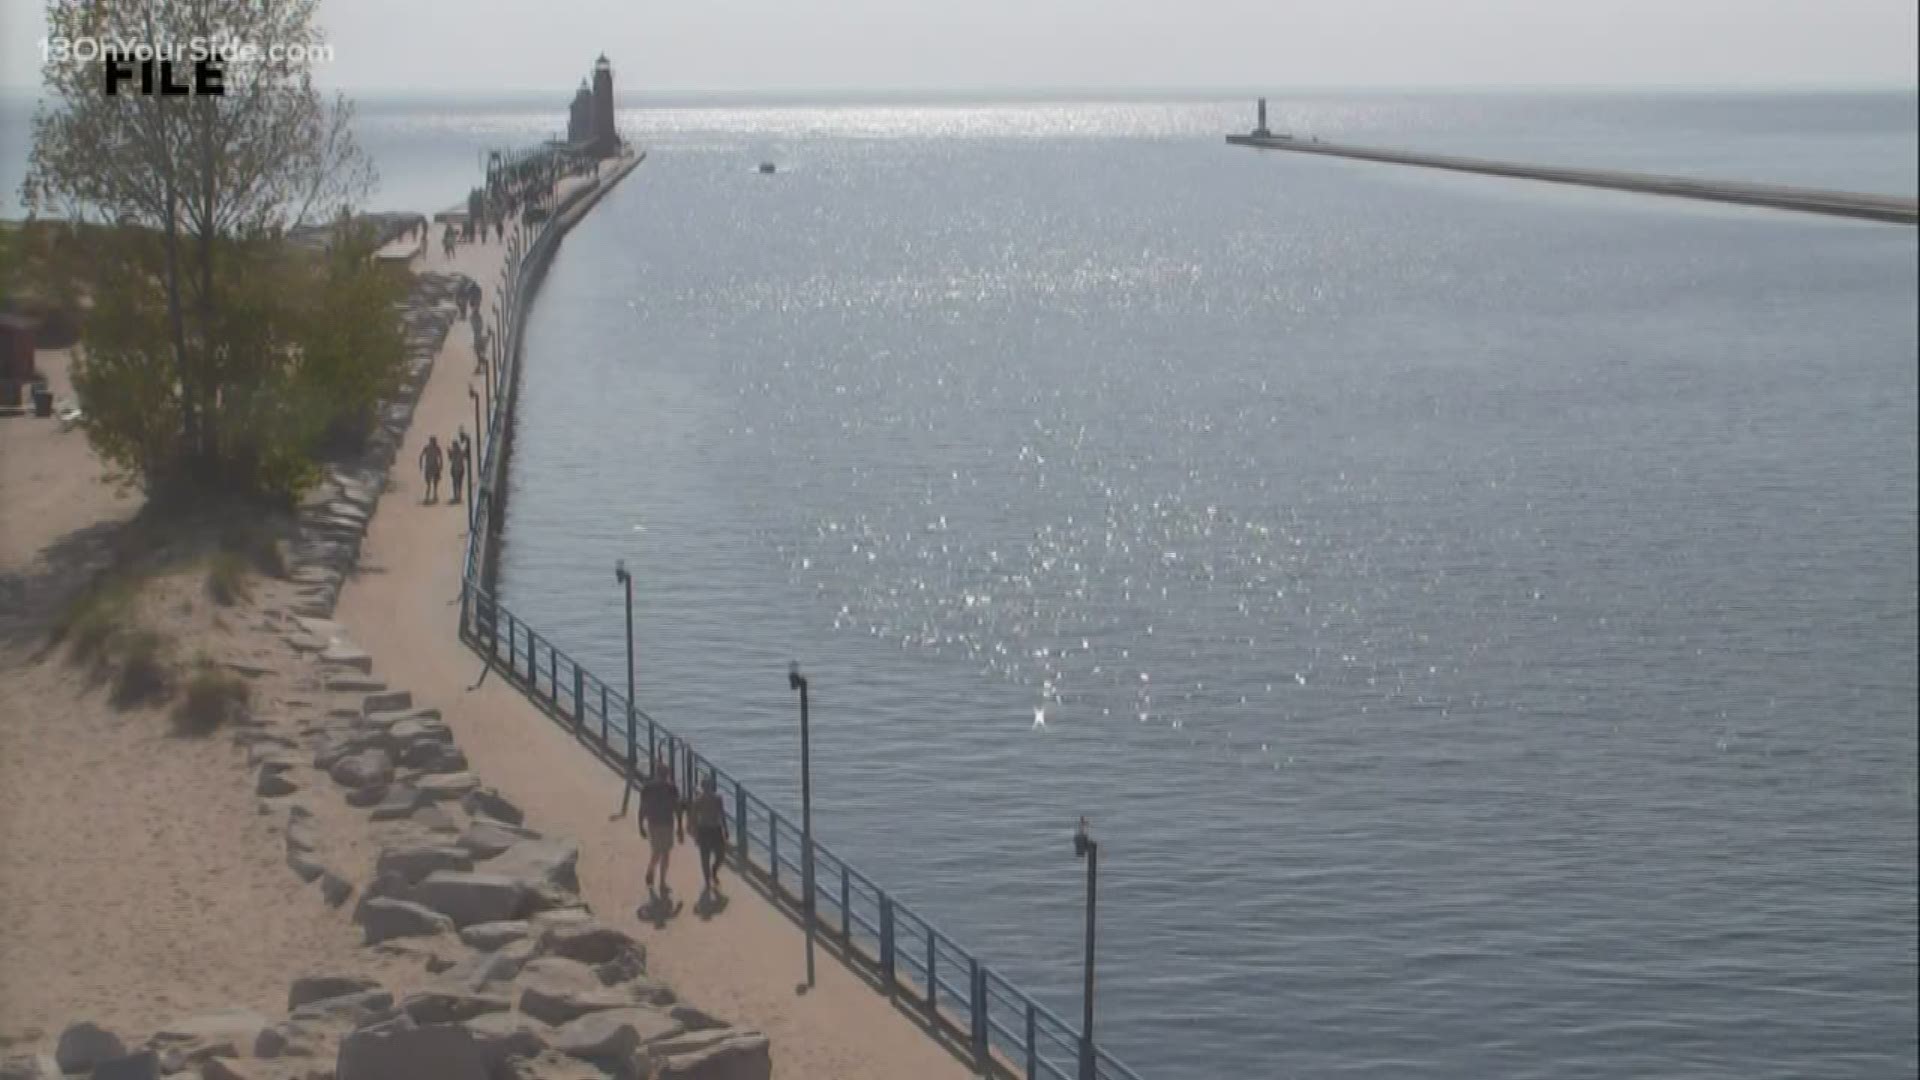 The program is part of the EPA's Great Lakes Restoration Initiative. It will fund up to a dozen projects, with the largest amount set at $500,000.